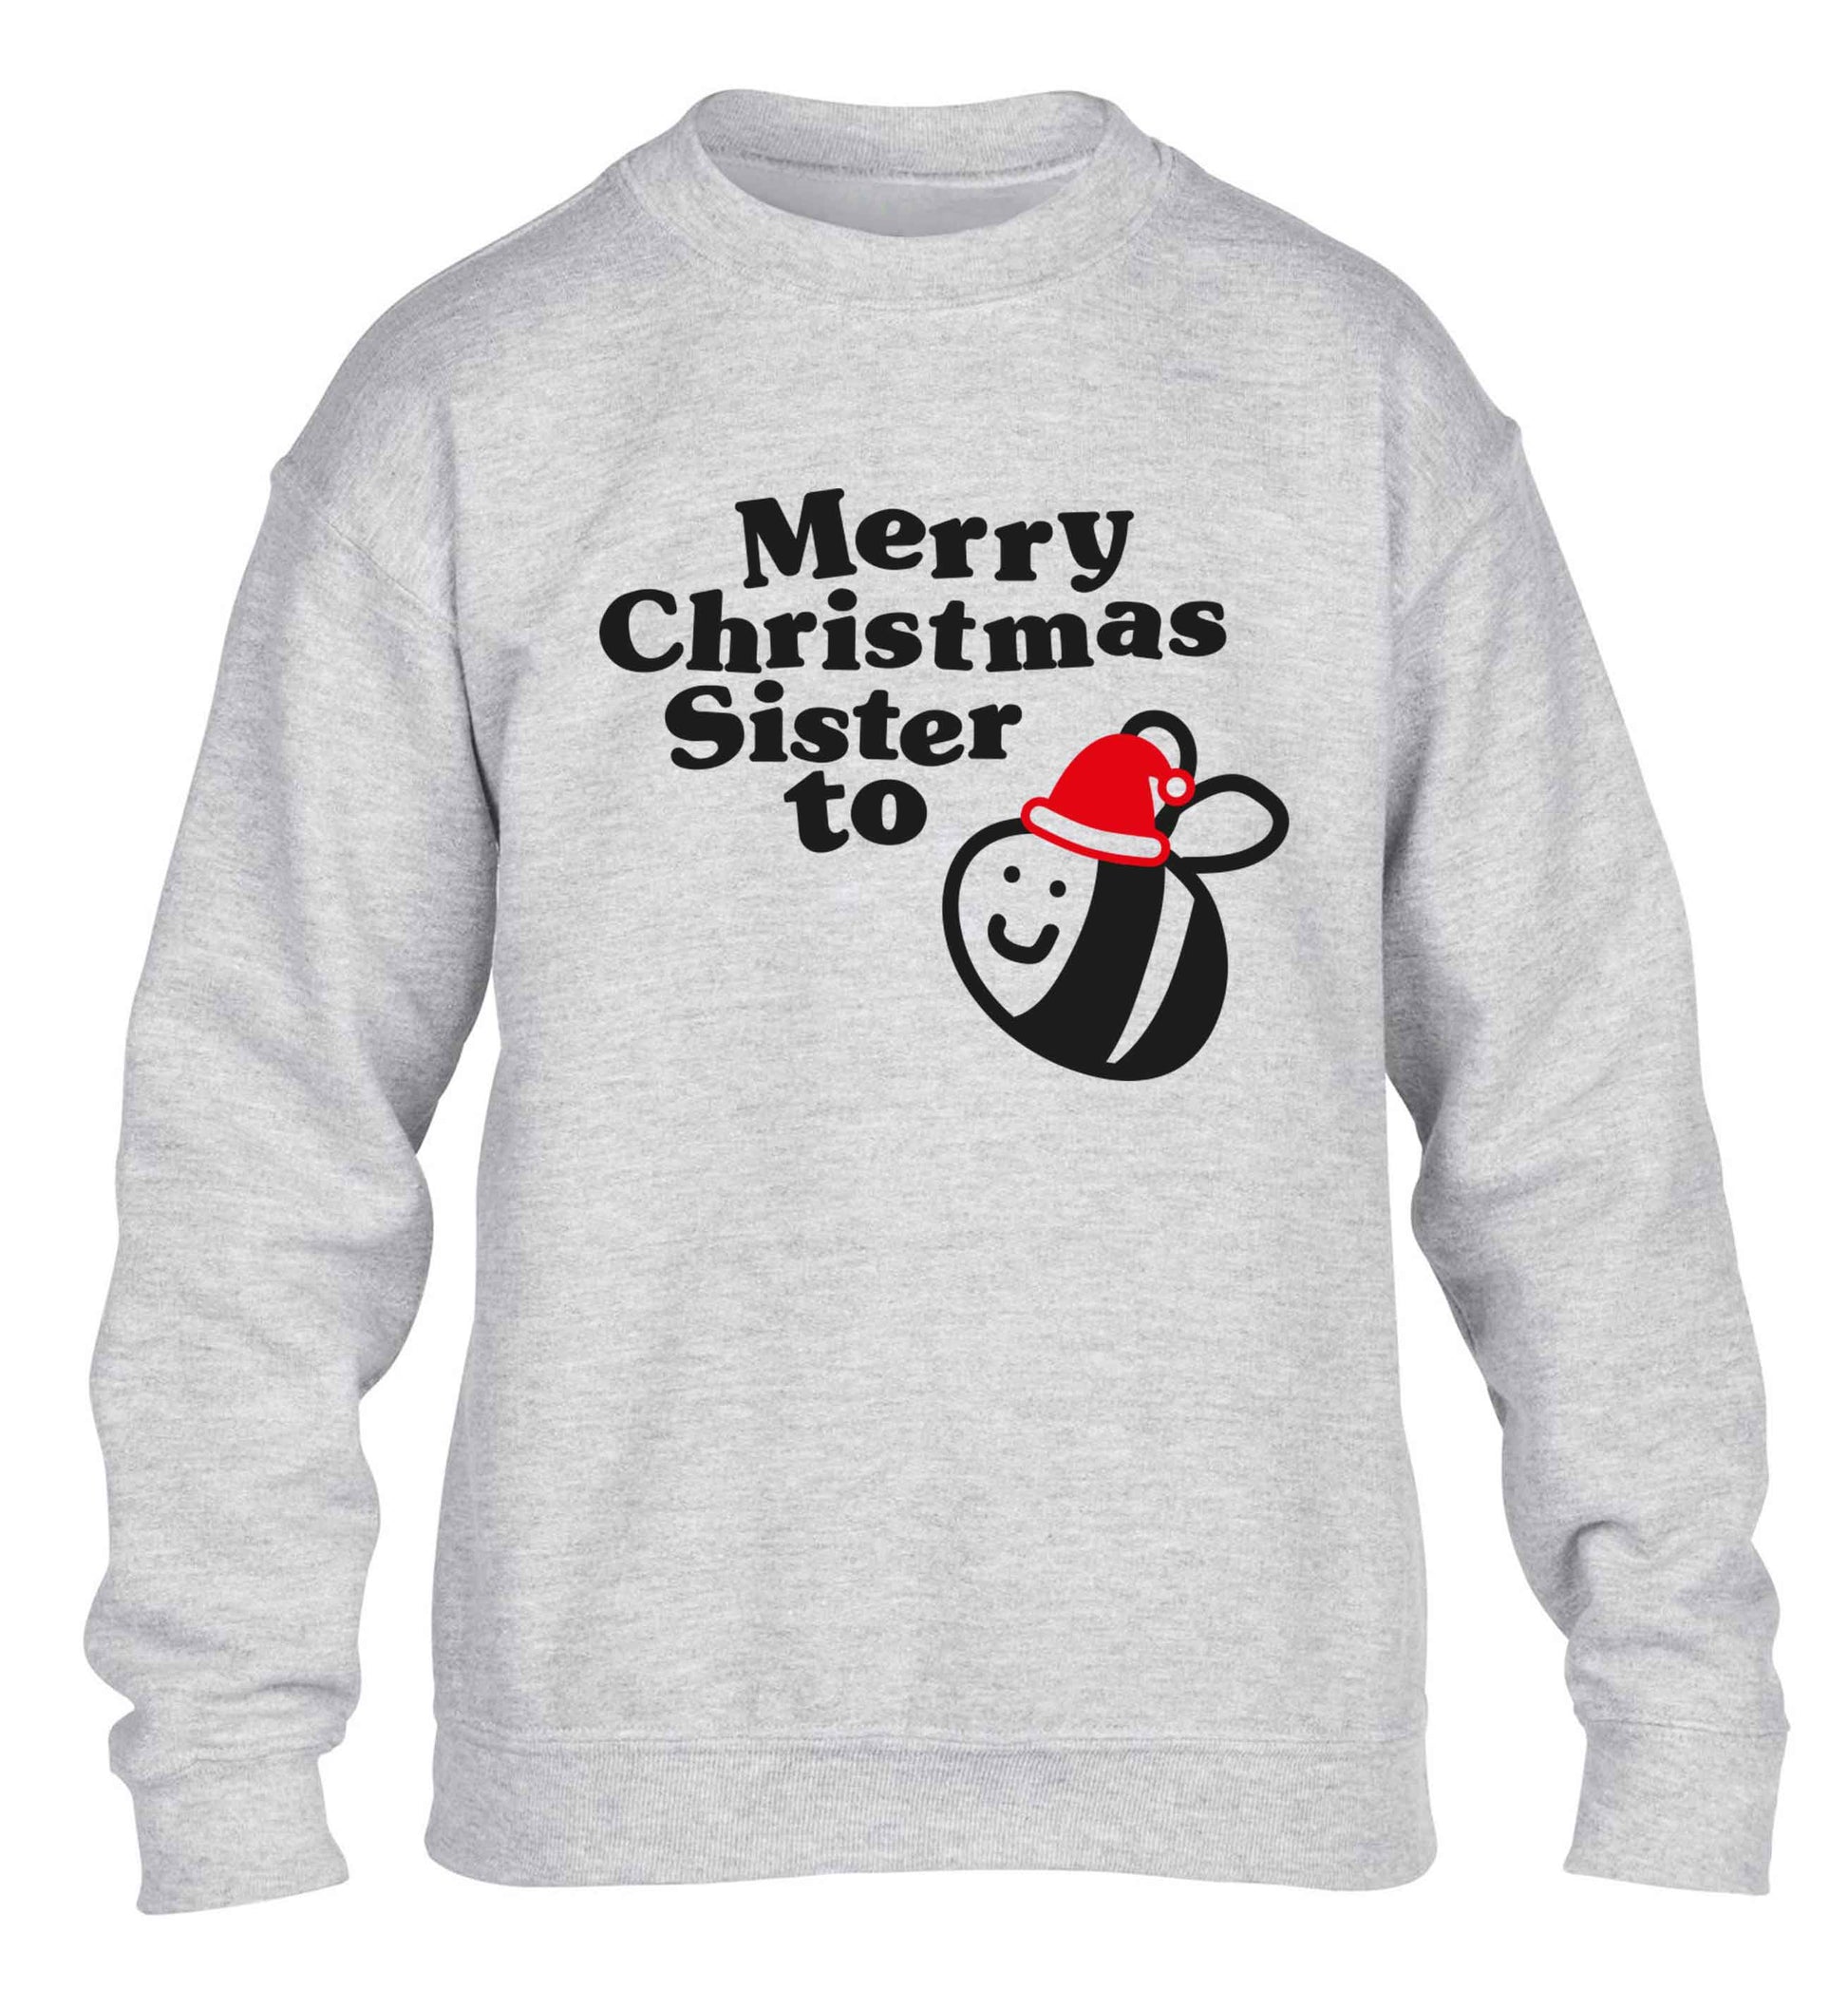 Merry Christmas sister to be children's grey sweater 12-13 Years